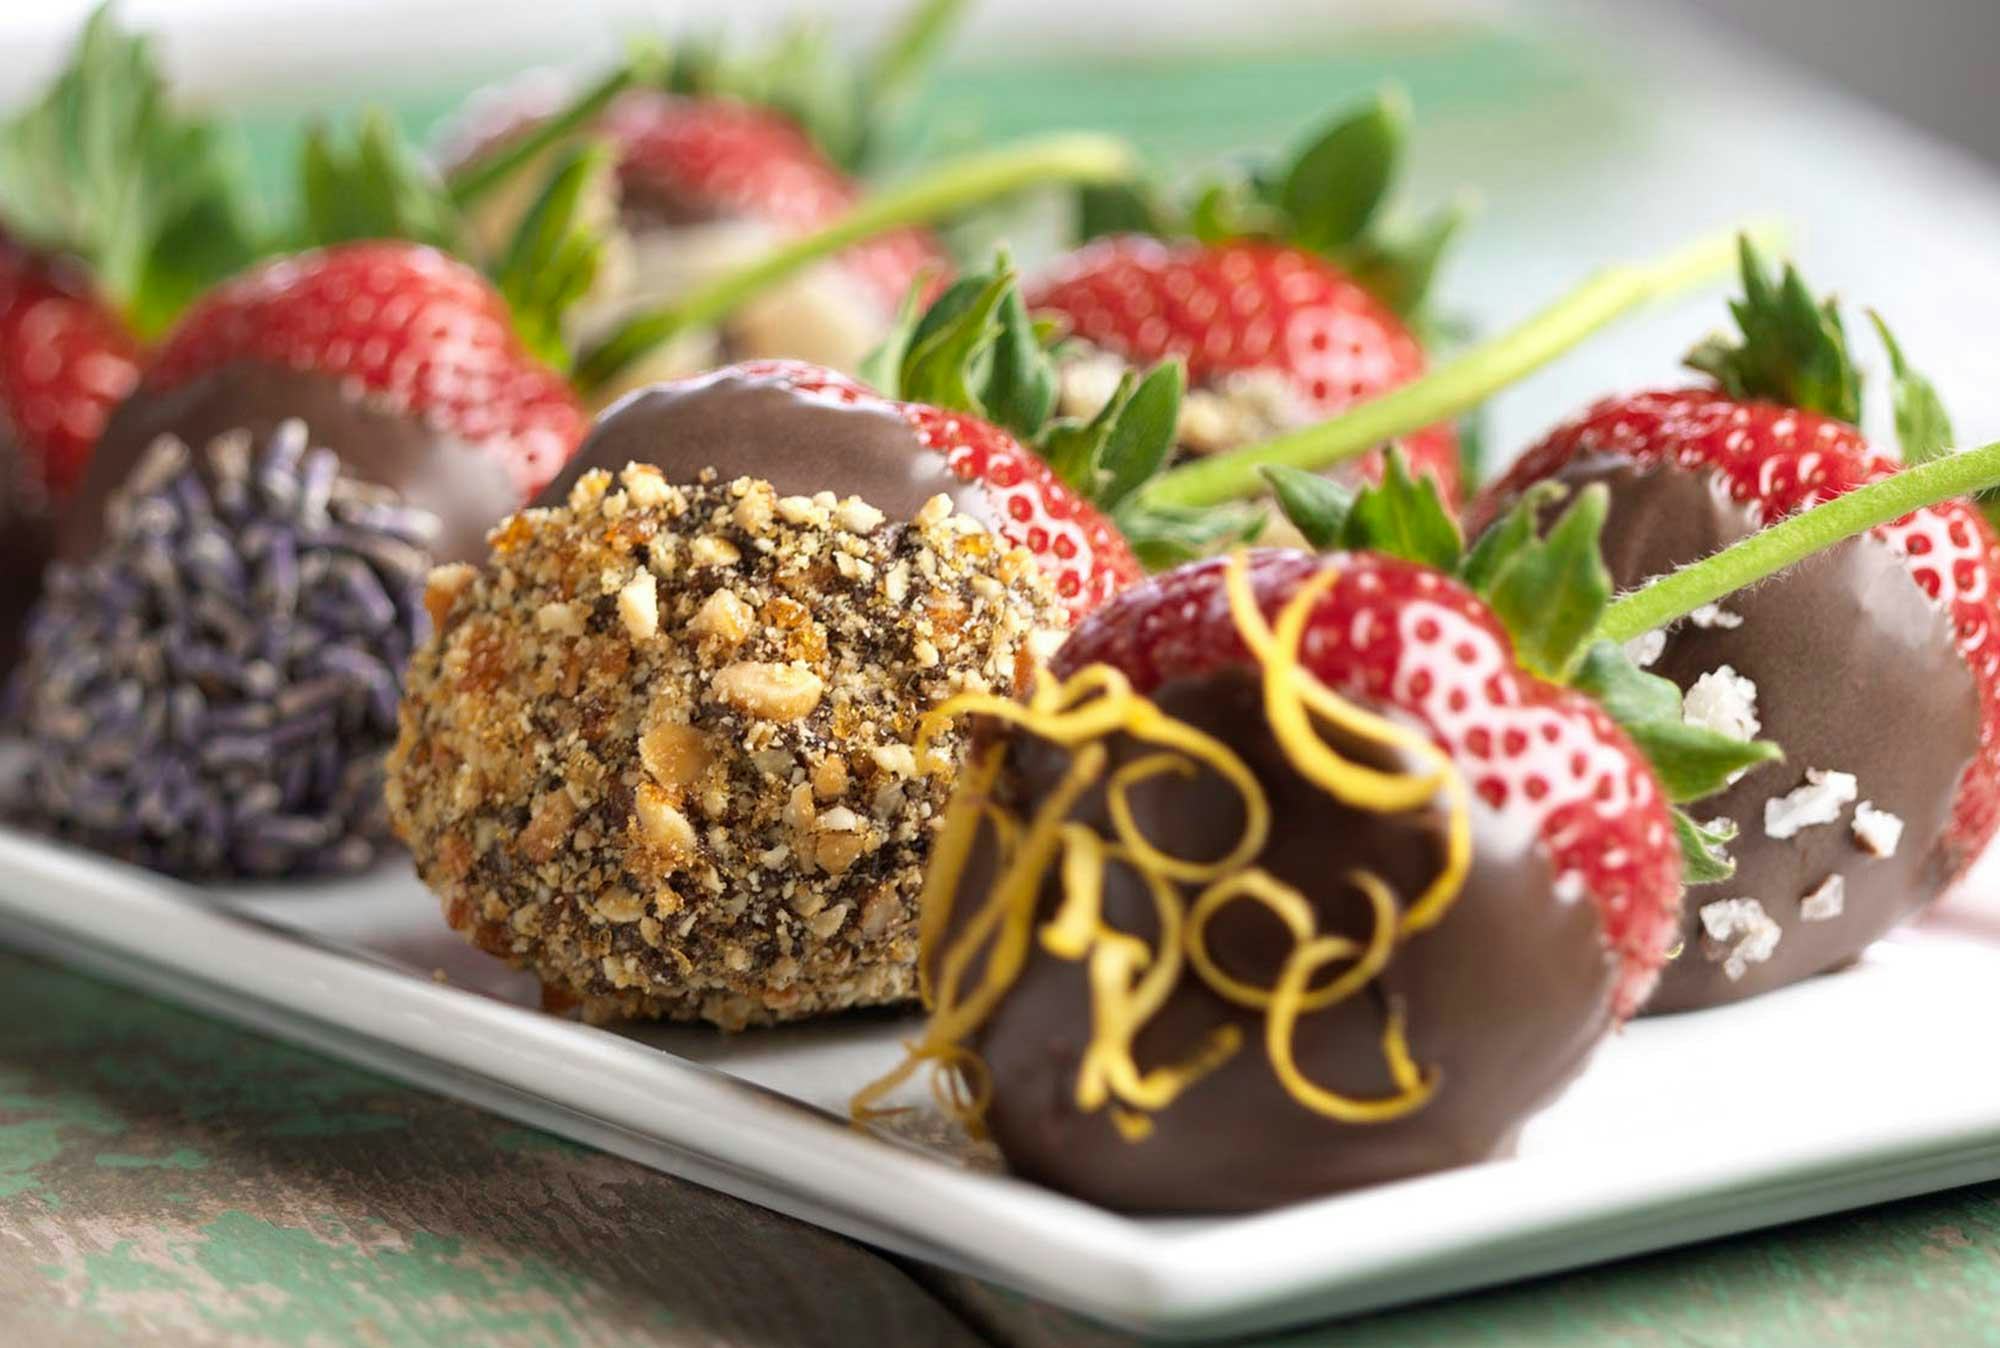 Chocolate Covered Strawberries (Tips & Tricks and Decorating Ideas!)